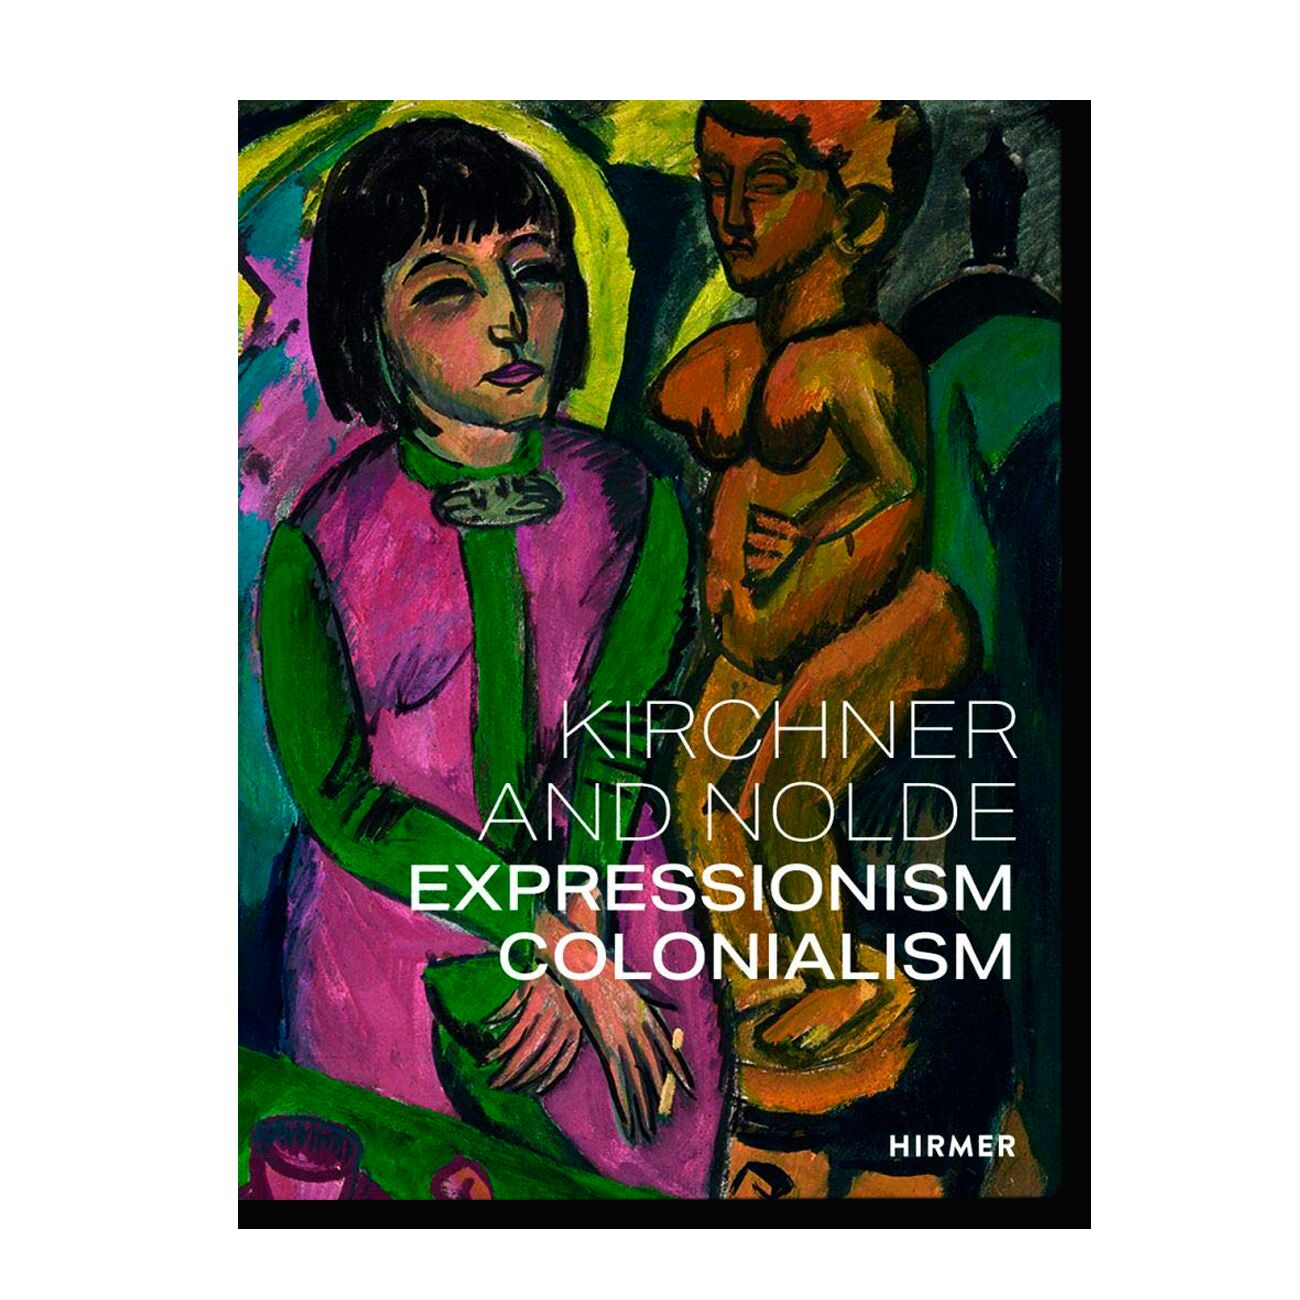 Kirchner and Nolde: Expressionism. Colonialism